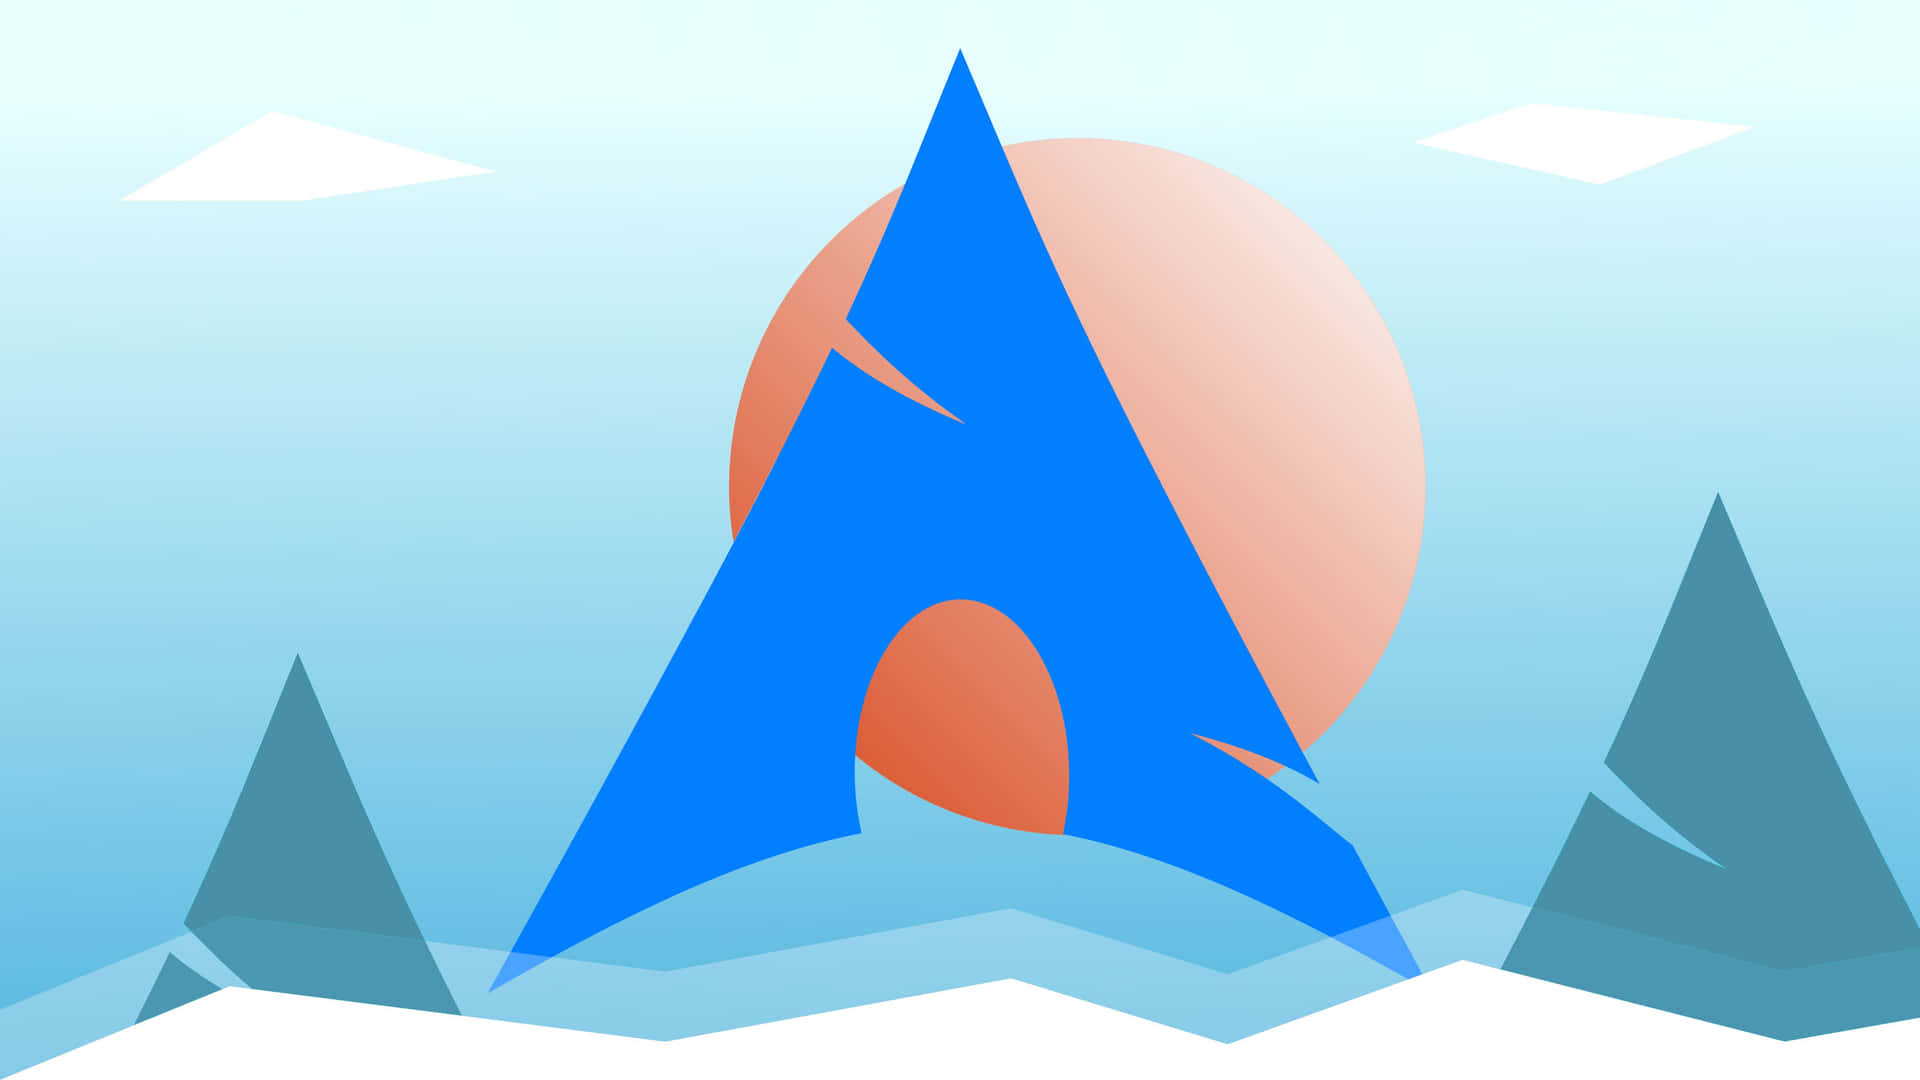 A Blue And Blue Arrow With Snow On It Wallpaper